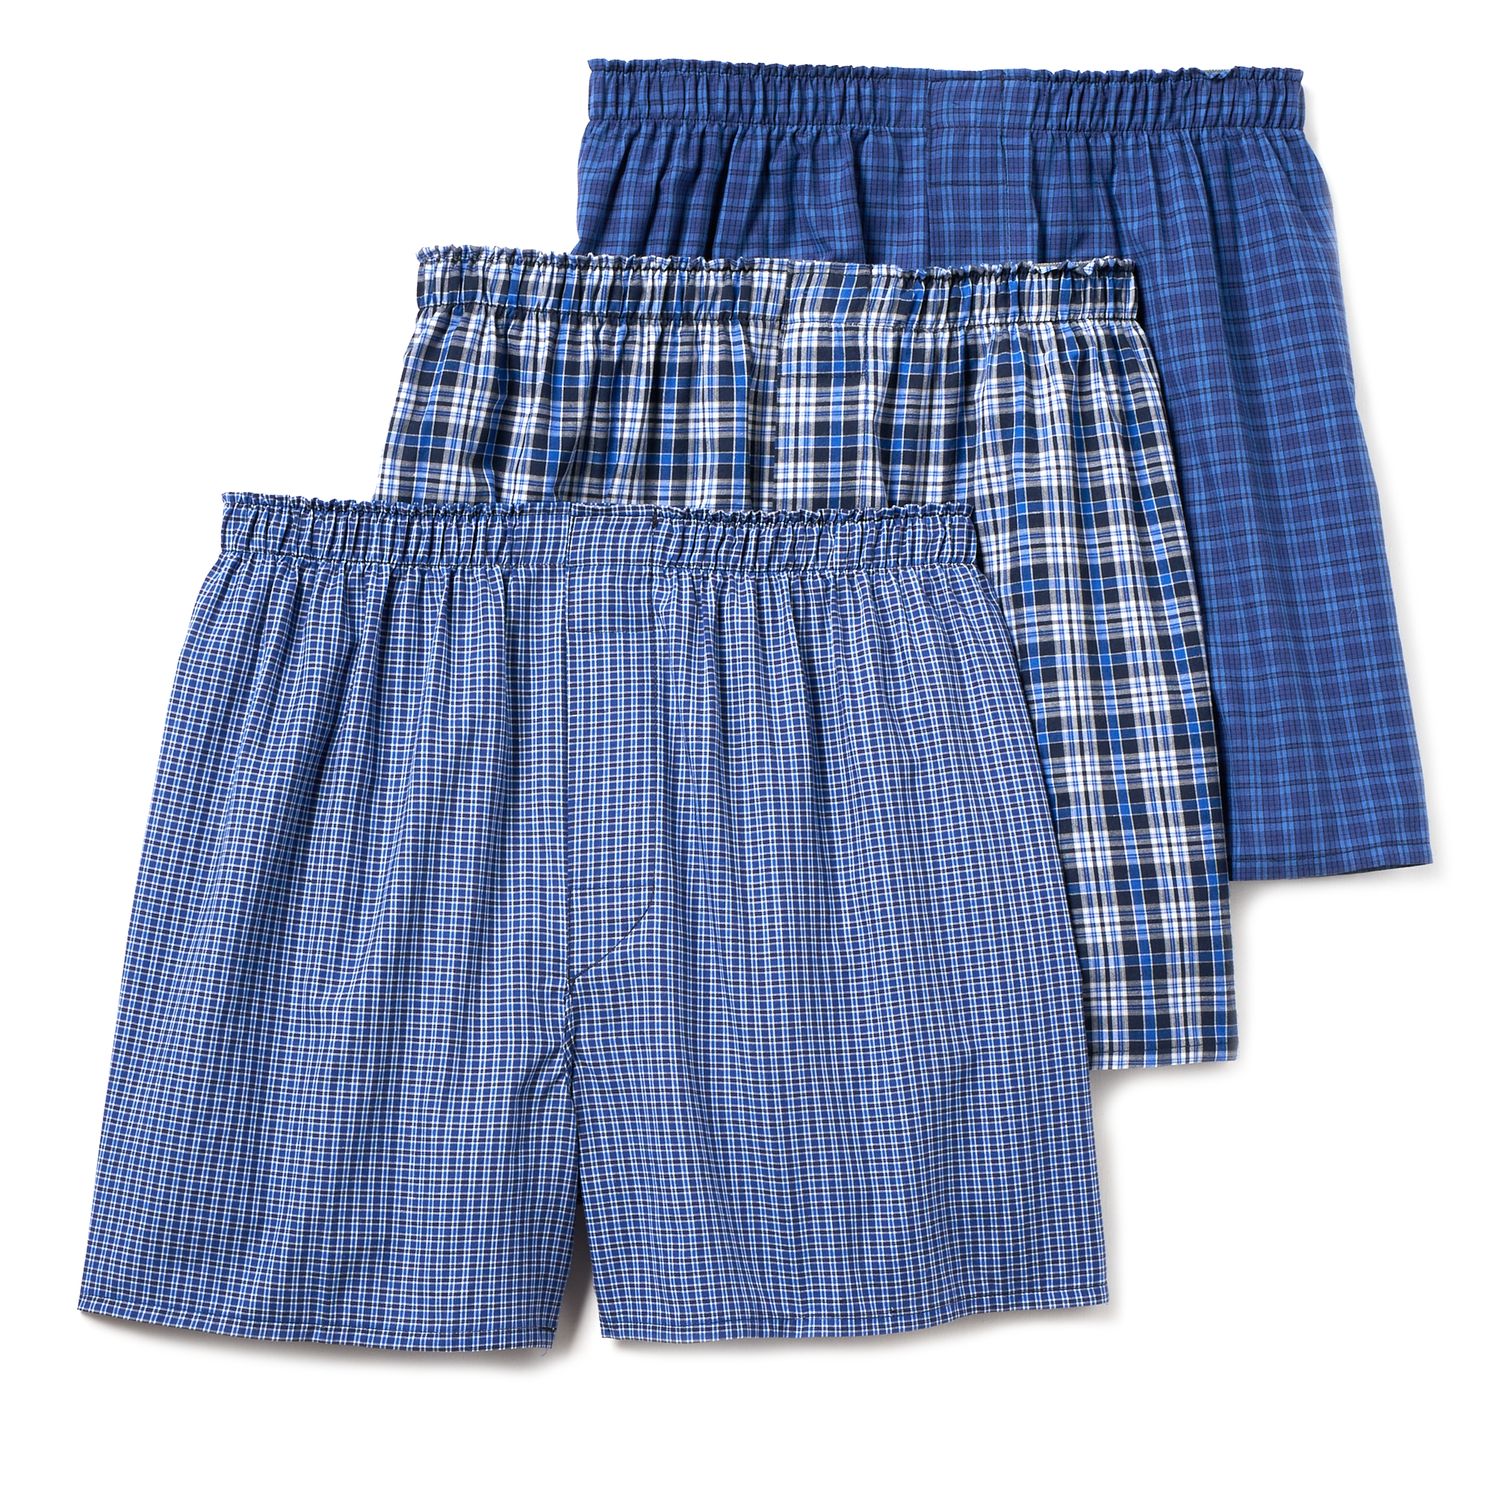 Image for Hanes Big & Tall 3-pack Woven Boxers at Kohl's.